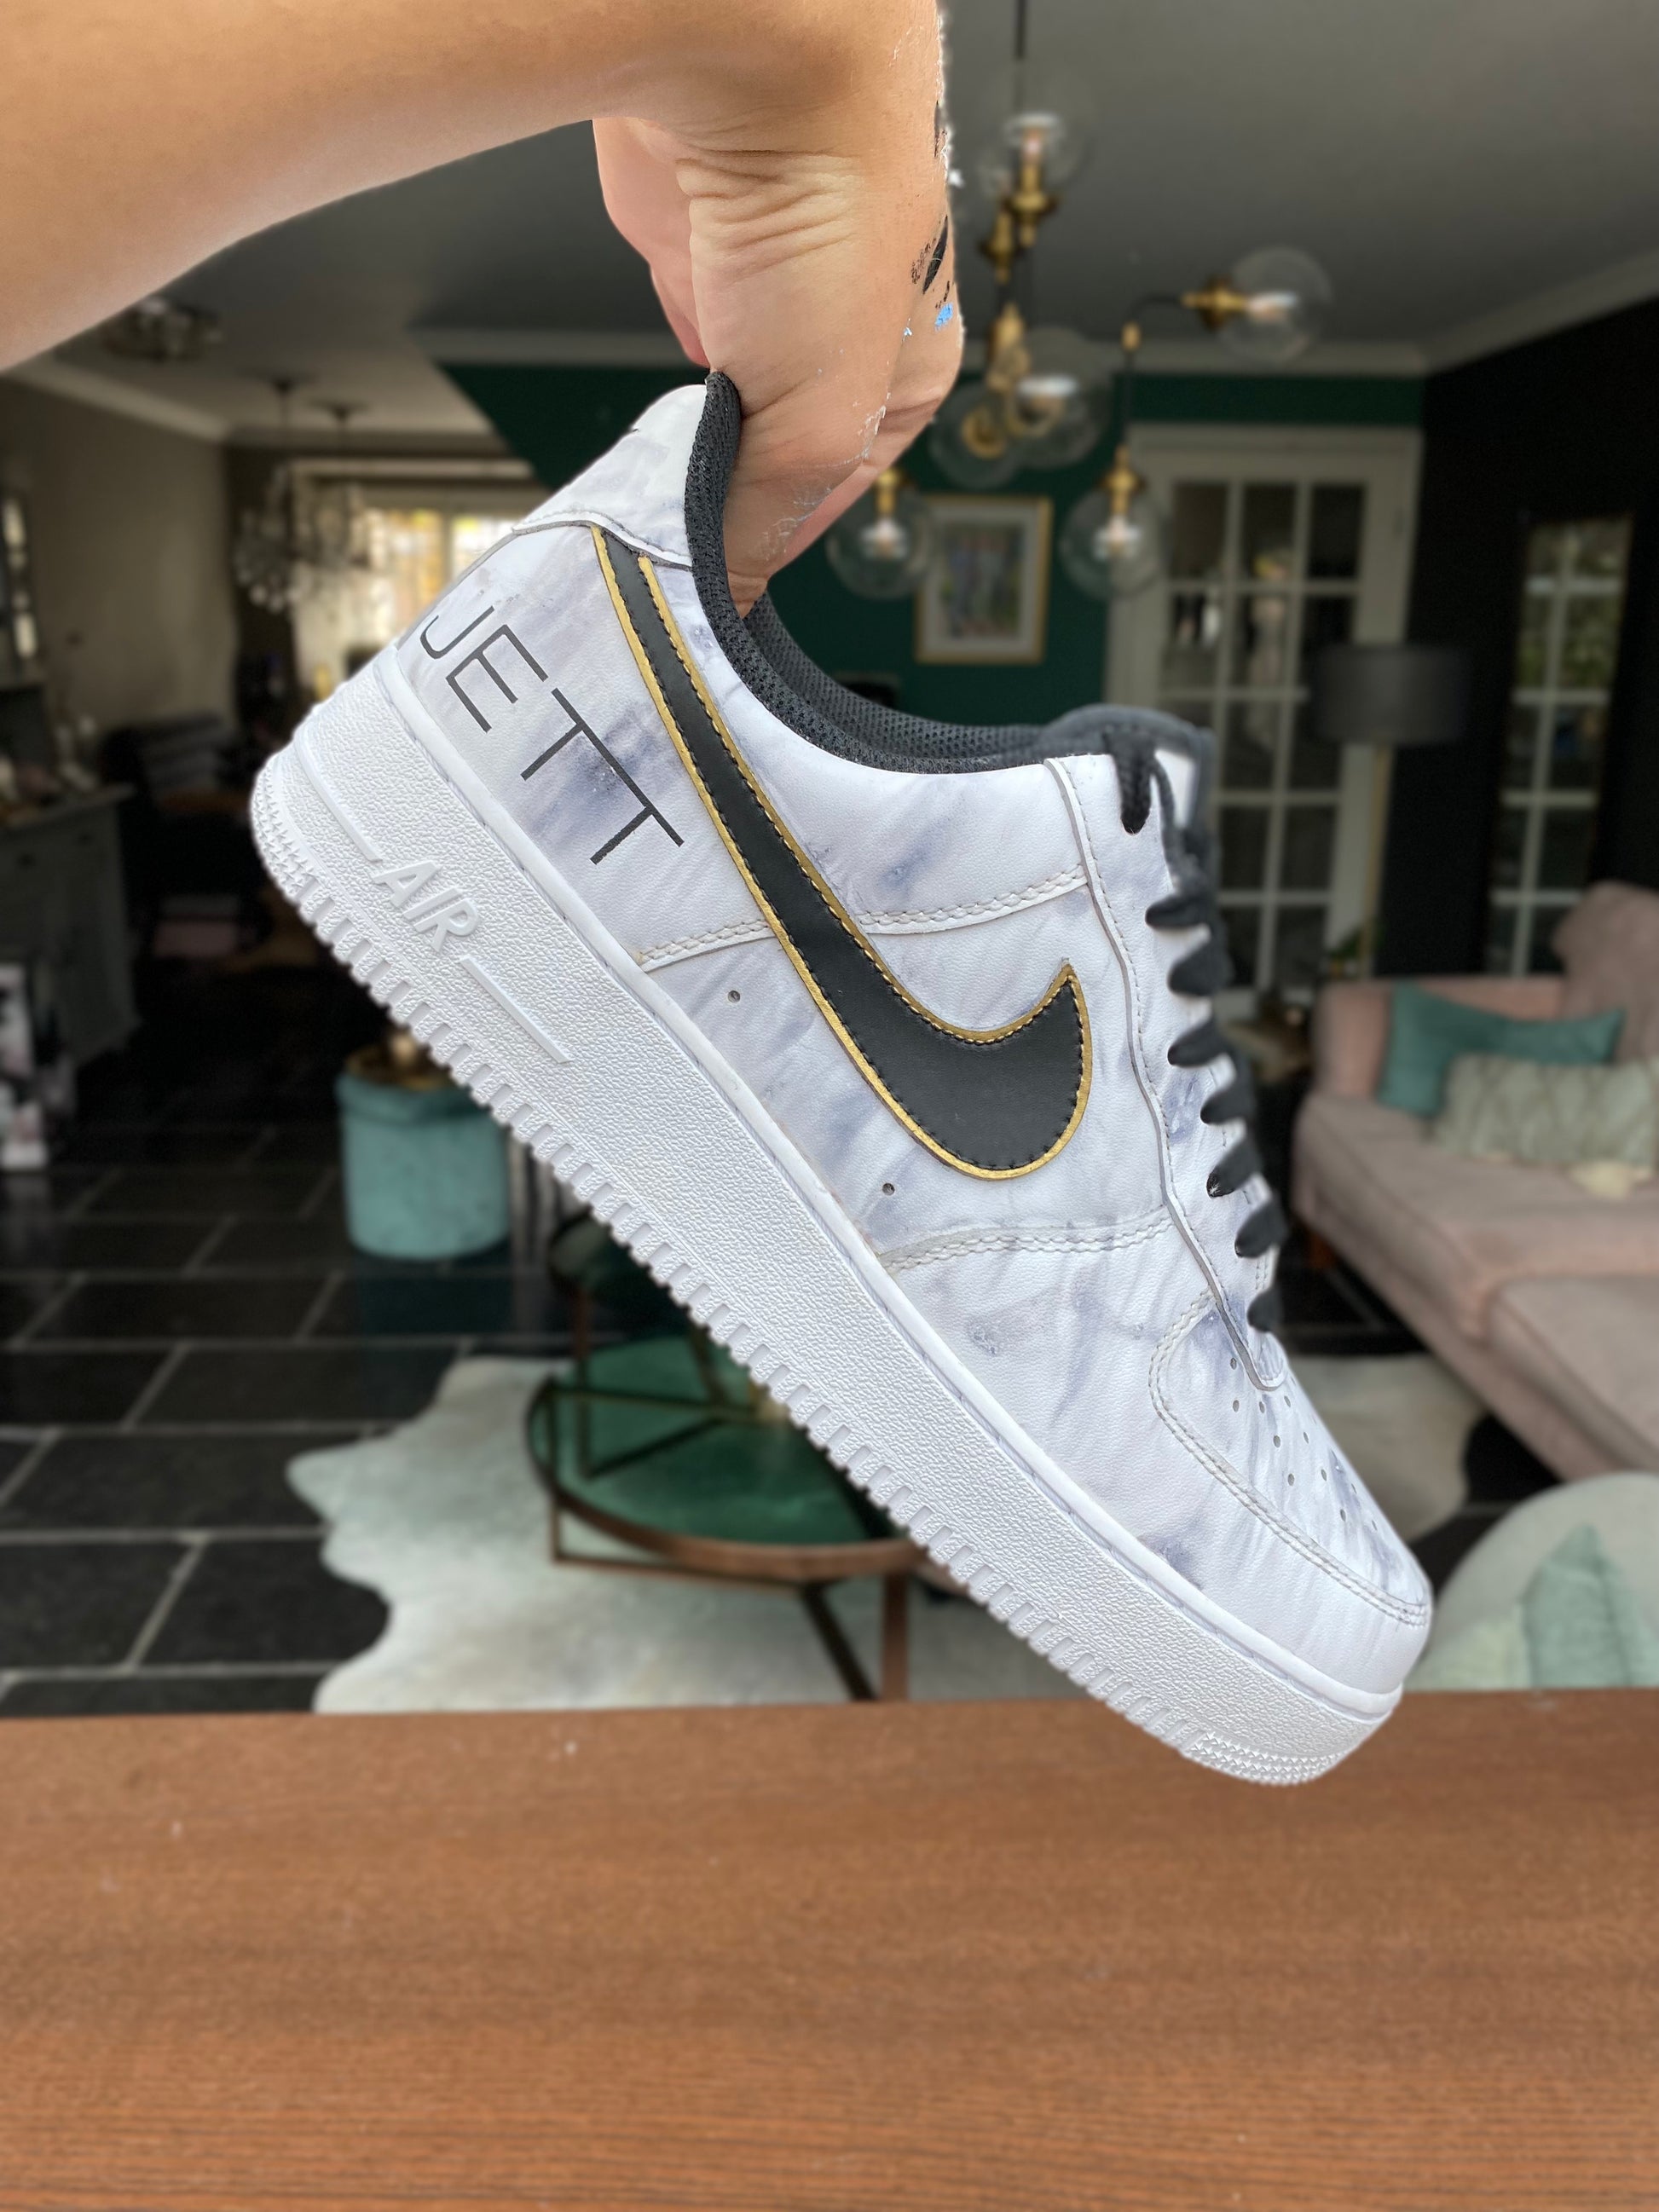 Custom Hand Painted Gold and Black Marble Nike Air Force 1 Low